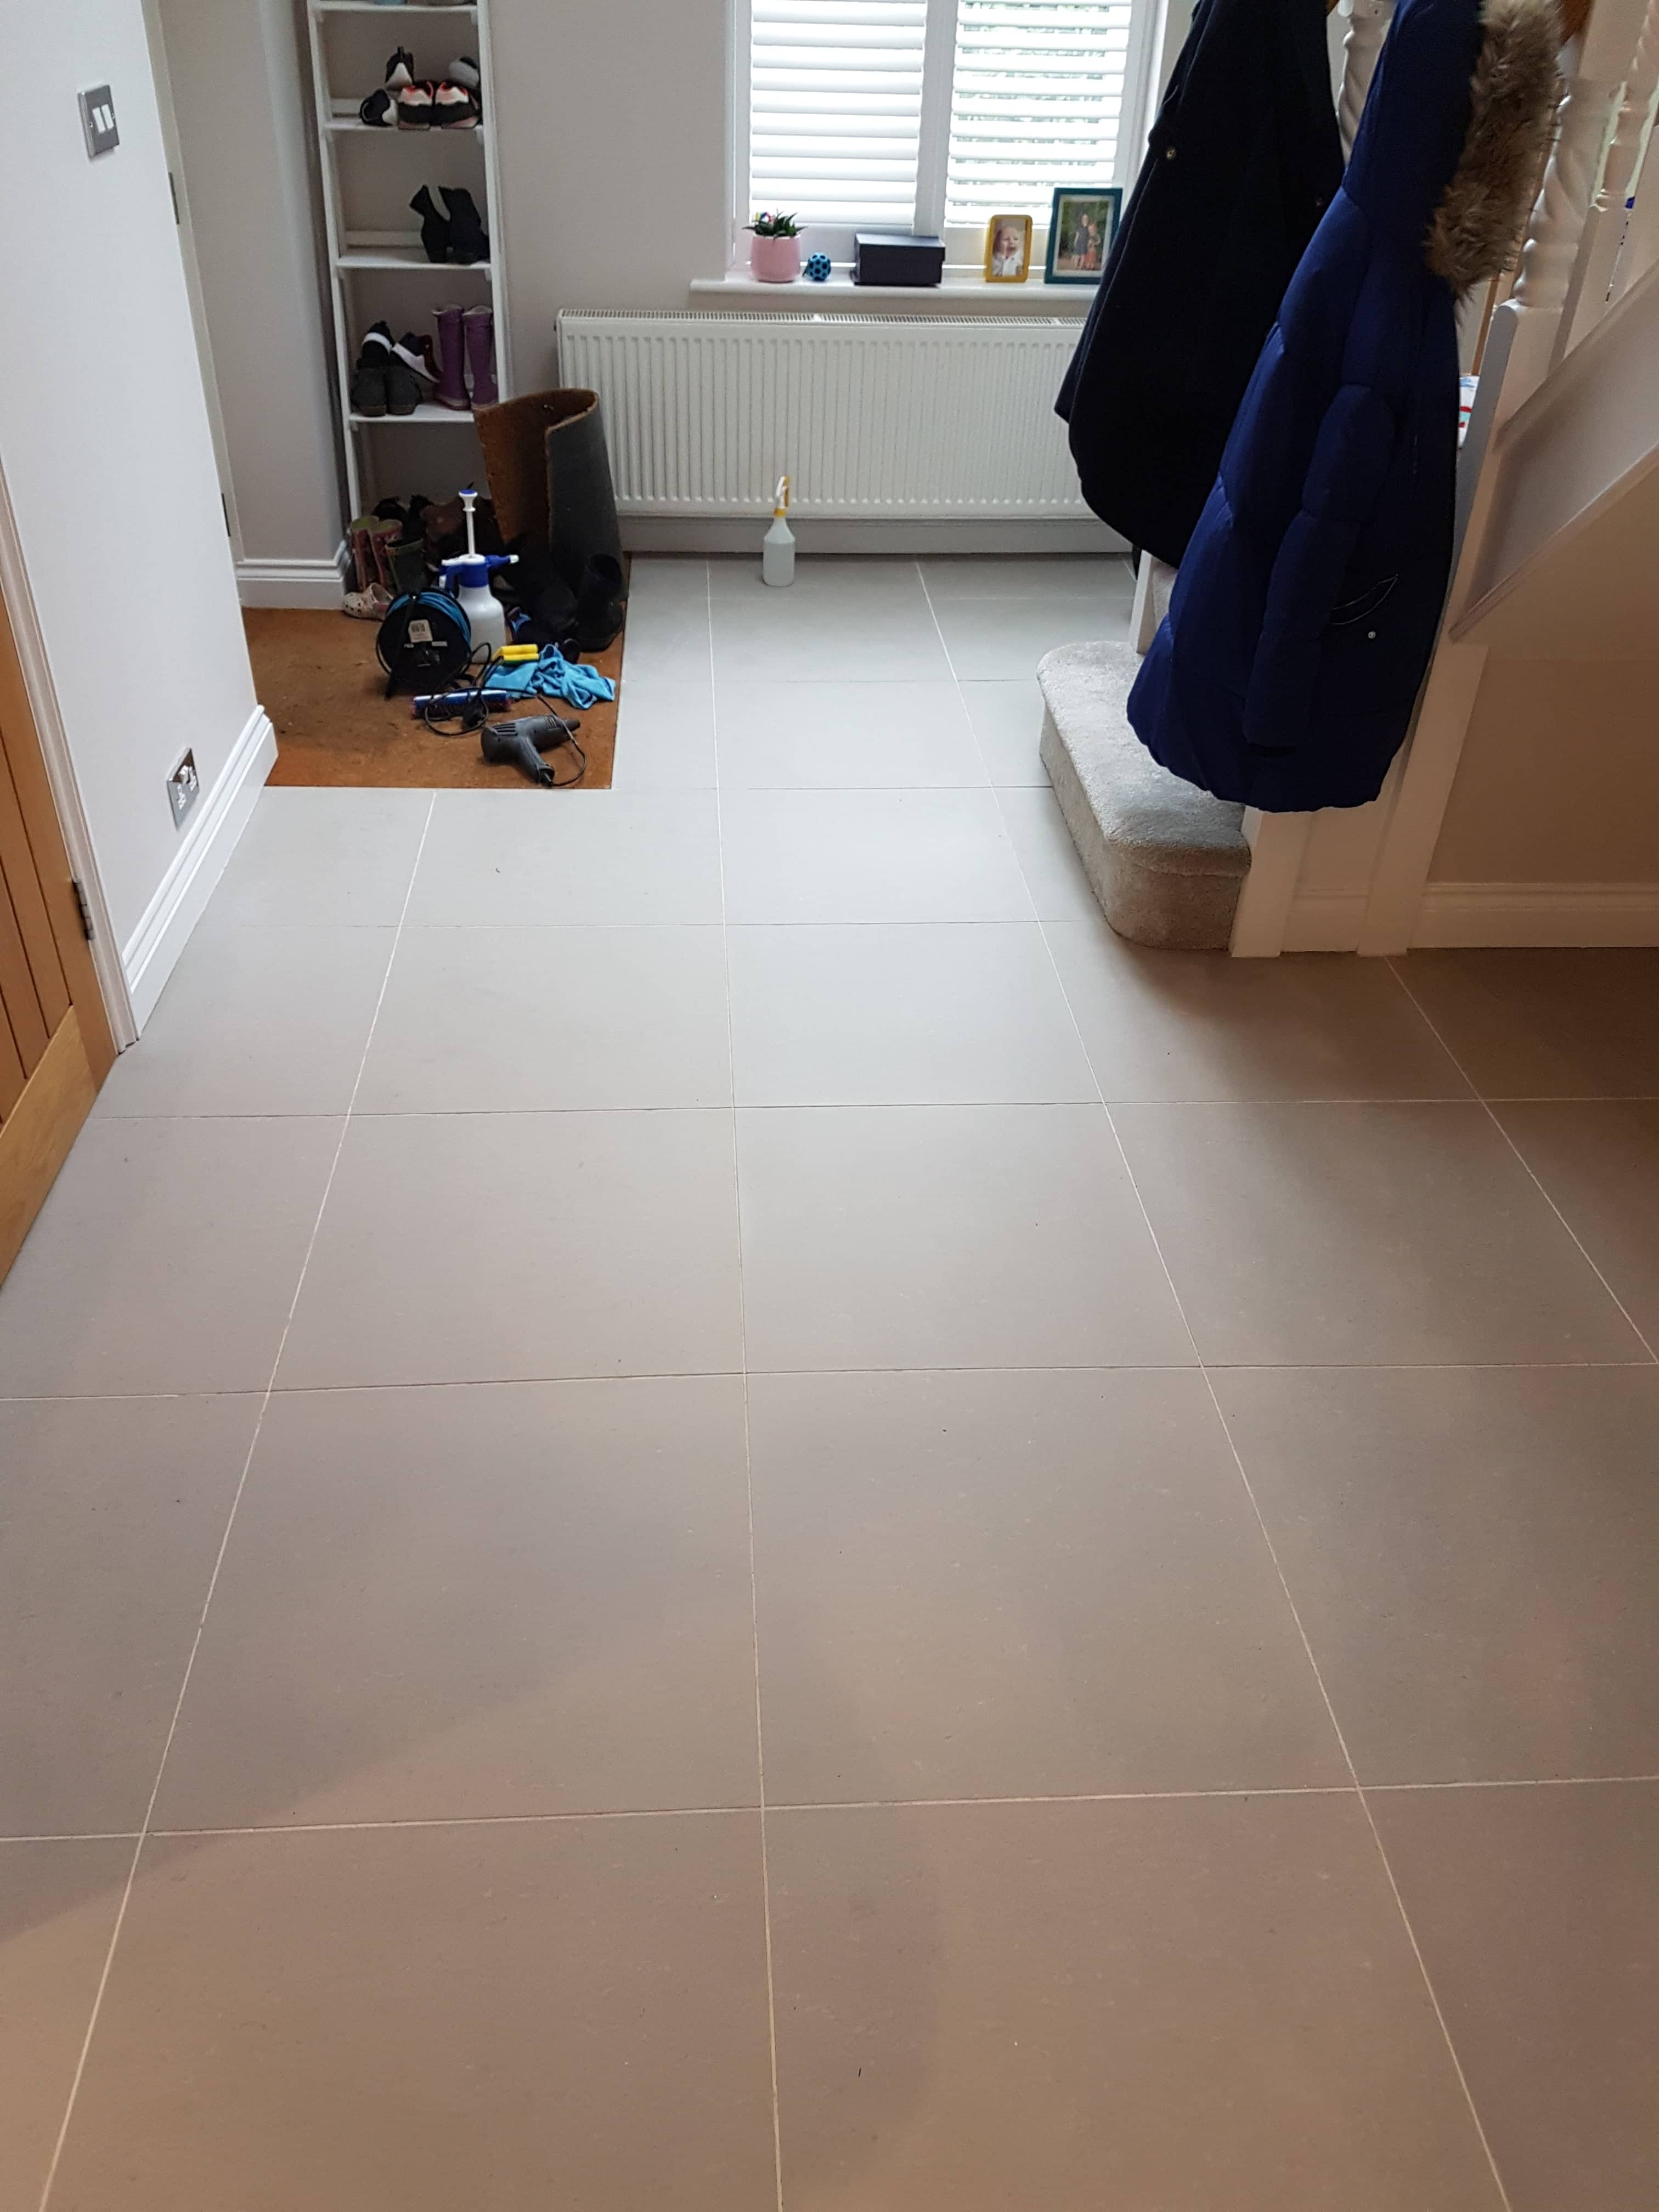 Porcelain Tile and Grout After Cleaning Beaconsfield Hallway